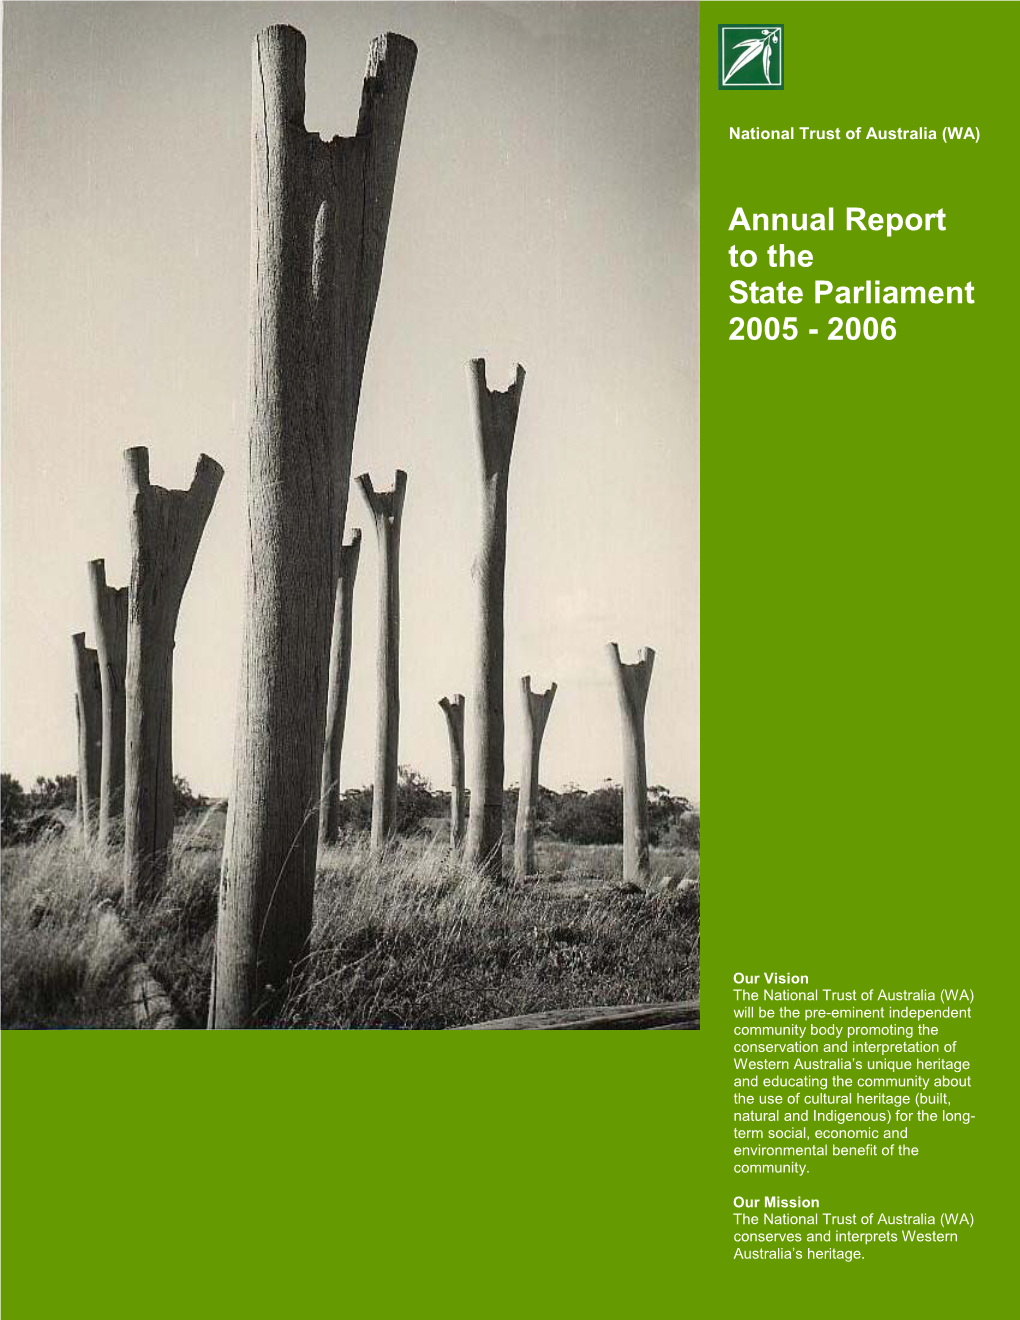 Annual Report to the State Parliament 2005 - 2006